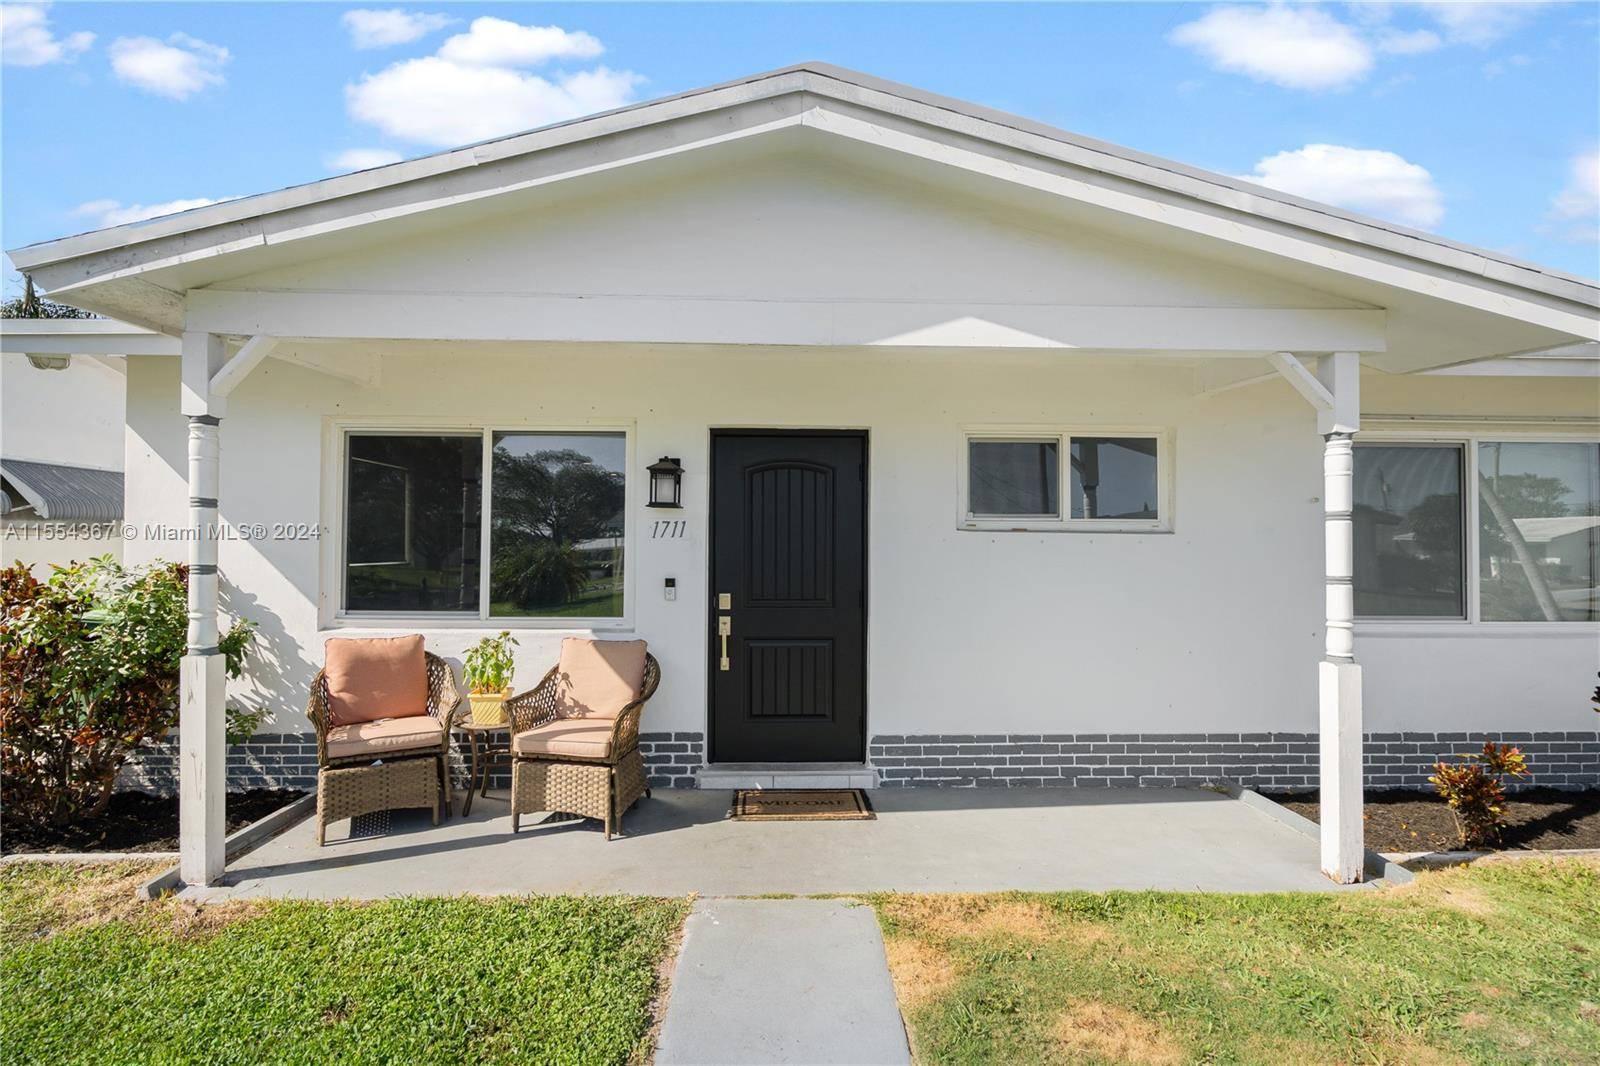 Exciting news ! A beautiful 2 bedroom single family home in Tamarac is now available for sale.